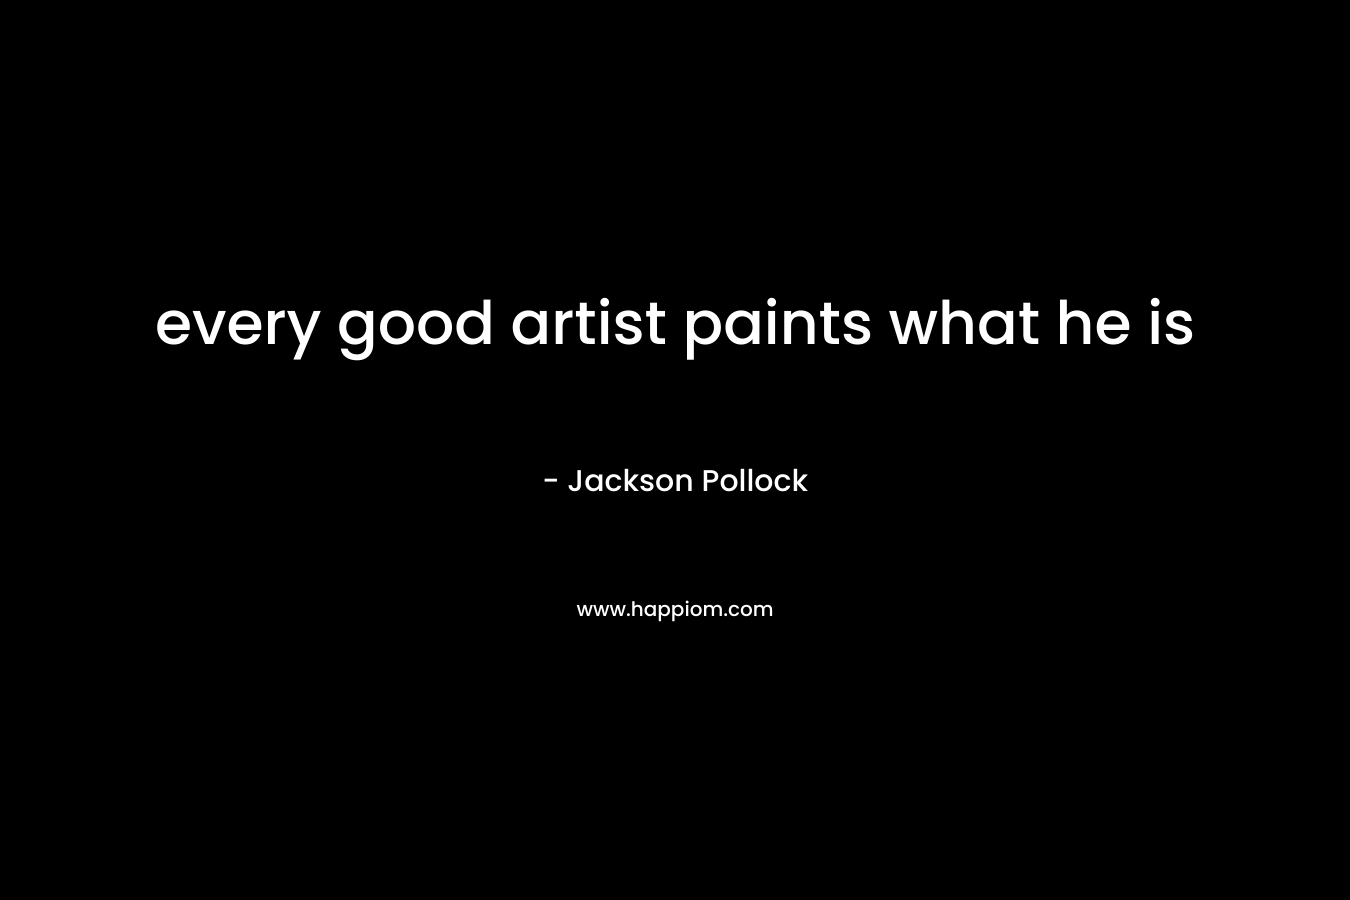 every good artist paints what he is